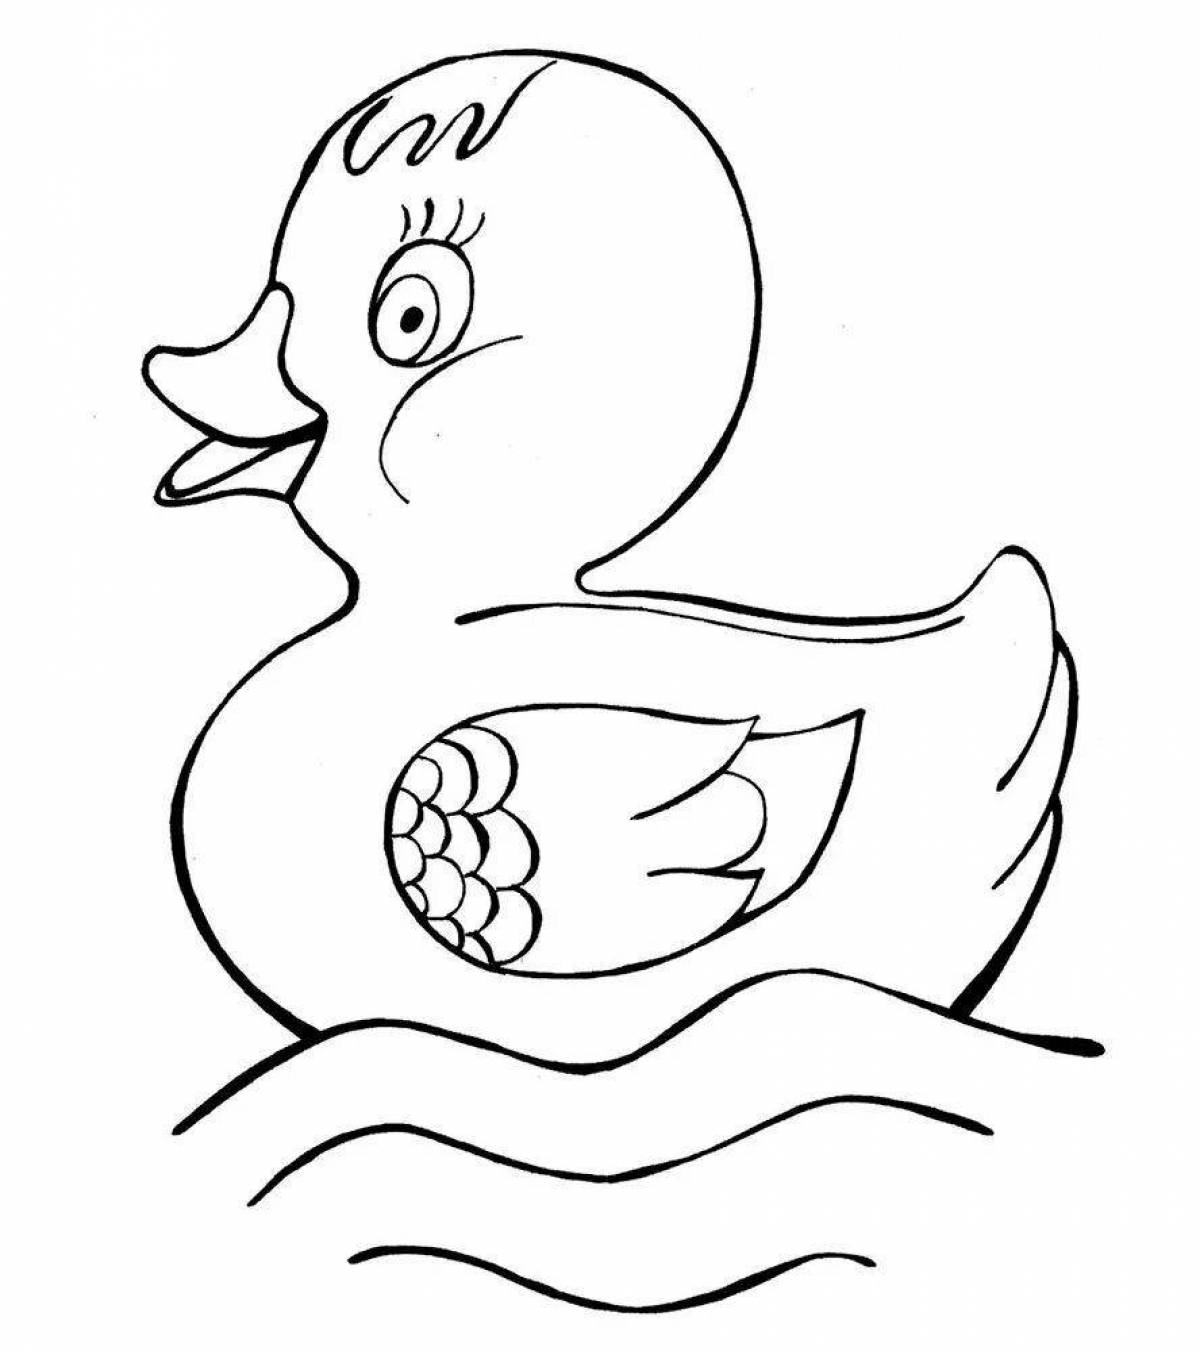 Colorful duck and duckling coloring page